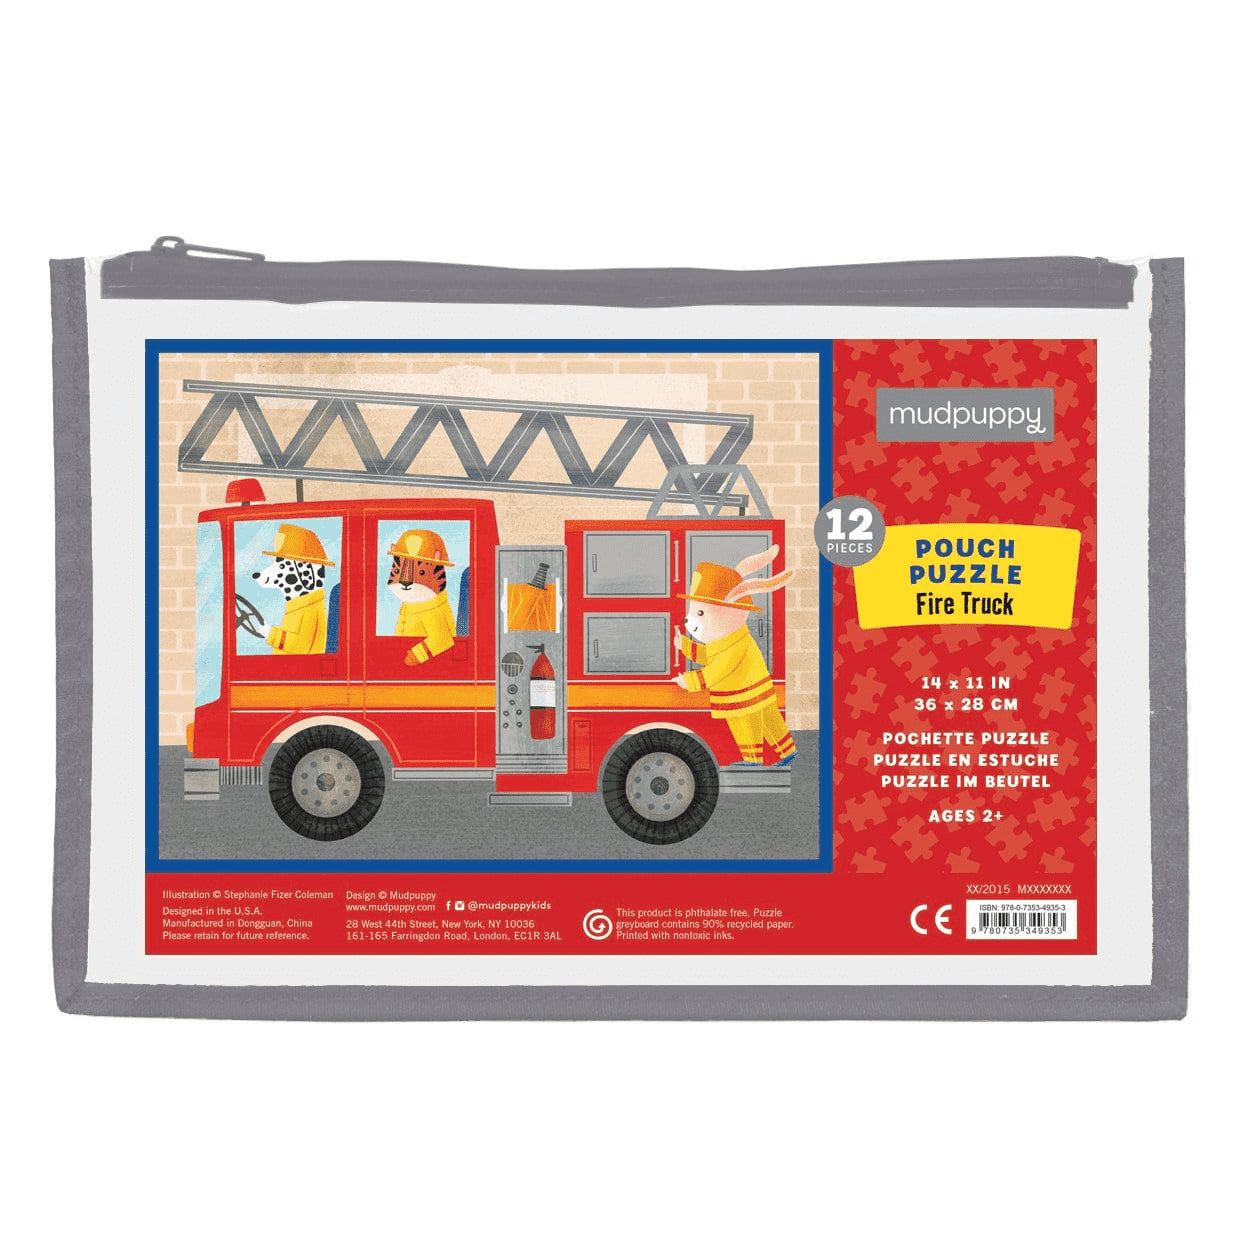 Pouch Puzzle - Fire Truck